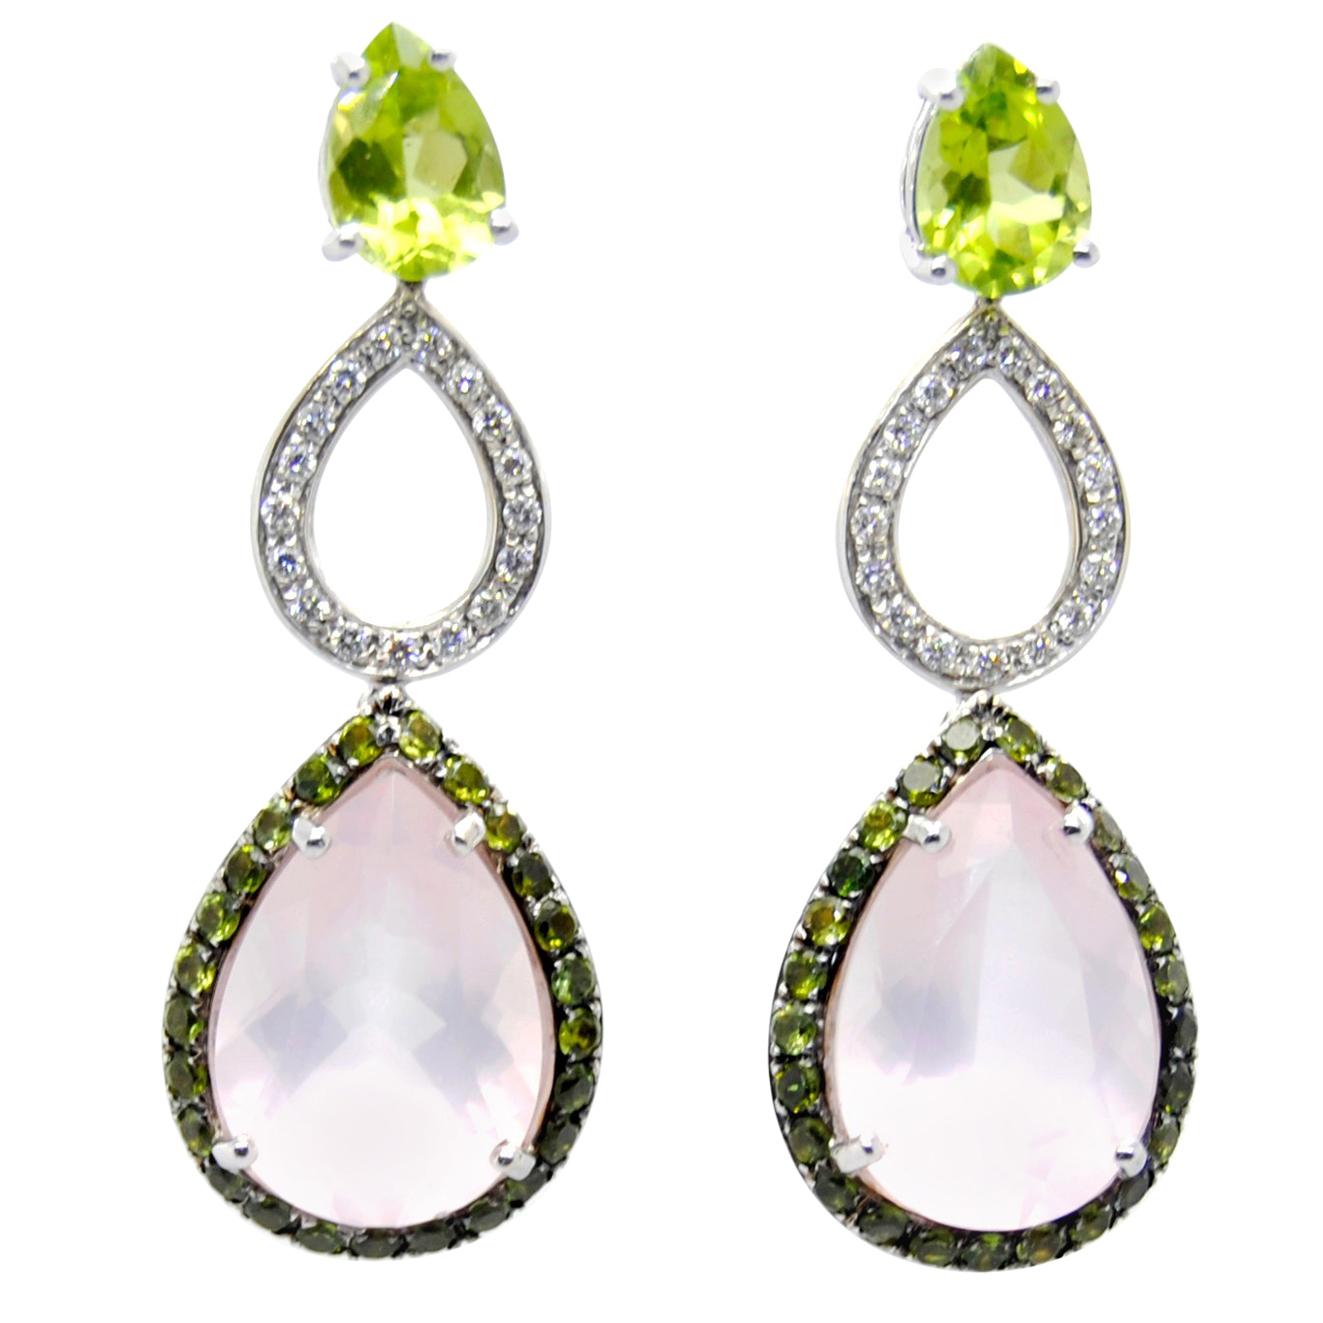 Mangiarotti 18 Karat White Gold, Brights and Stones Earrings For Sale